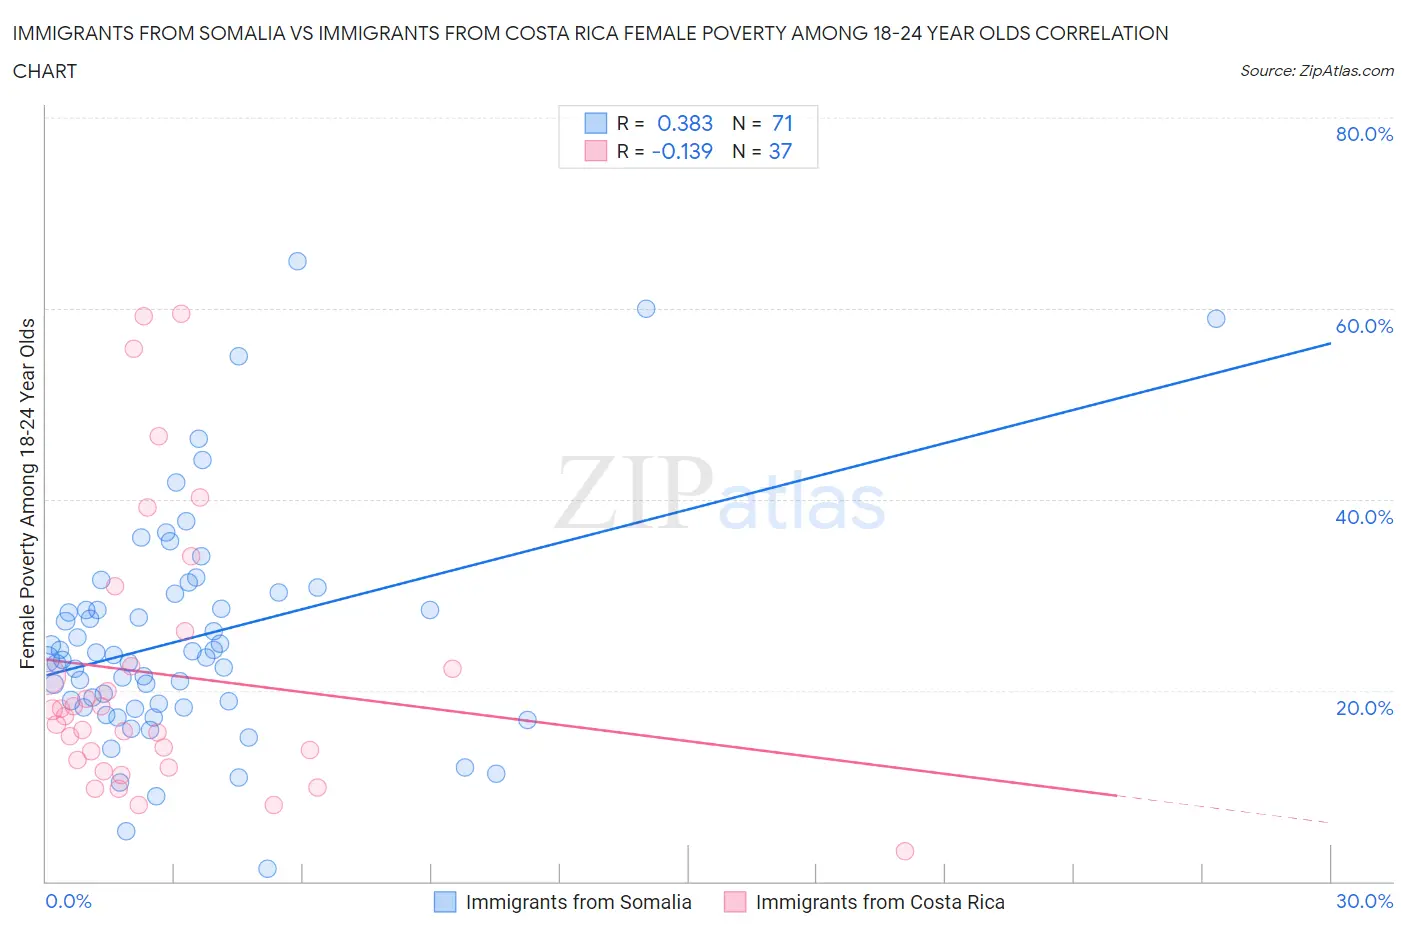 Immigrants from Somalia vs Immigrants from Costa Rica Female Poverty Among 18-24 Year Olds